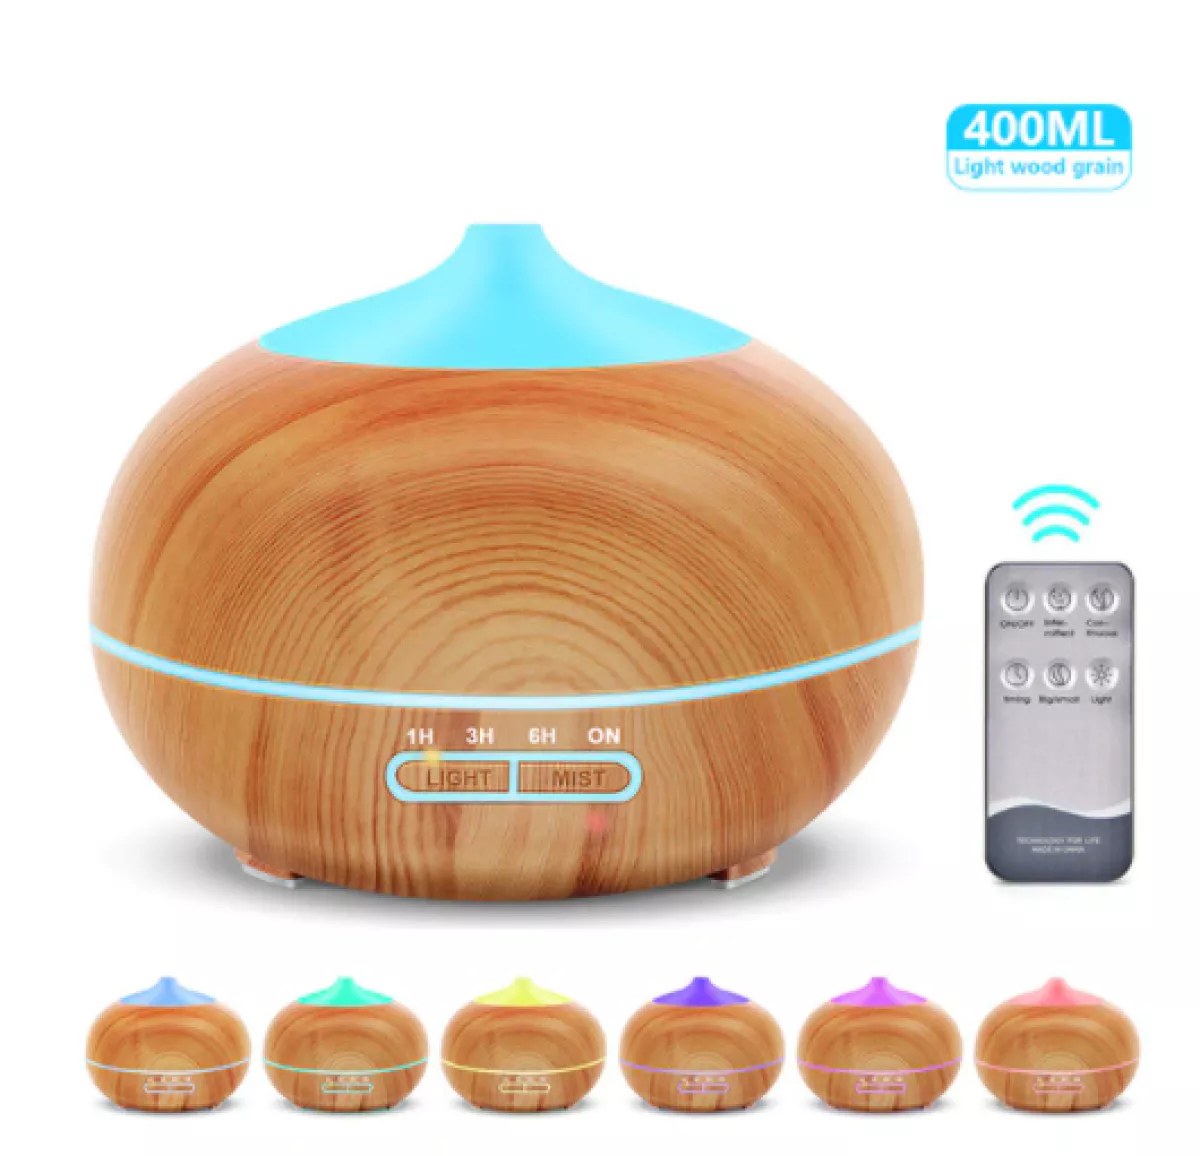 #1 - Aroma Diffuser - Duftlampe 400 ml, H1 Lys